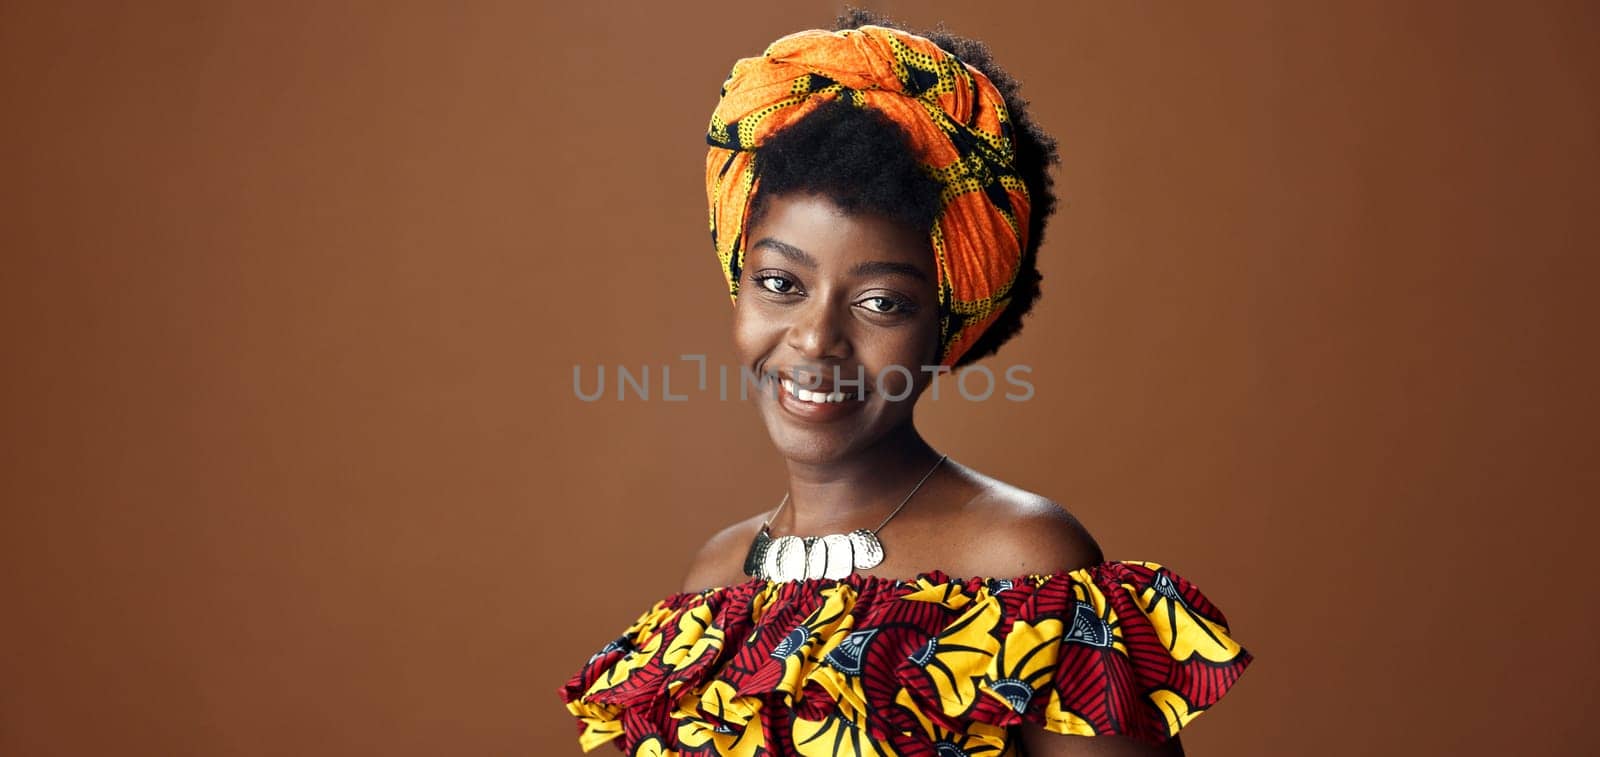 Wrap, fashion or face of happy black woman in studio on a brown background for trendy style. Smile, African or model with confidence, pride or afro posing in culture, clothes or traditional outfit.